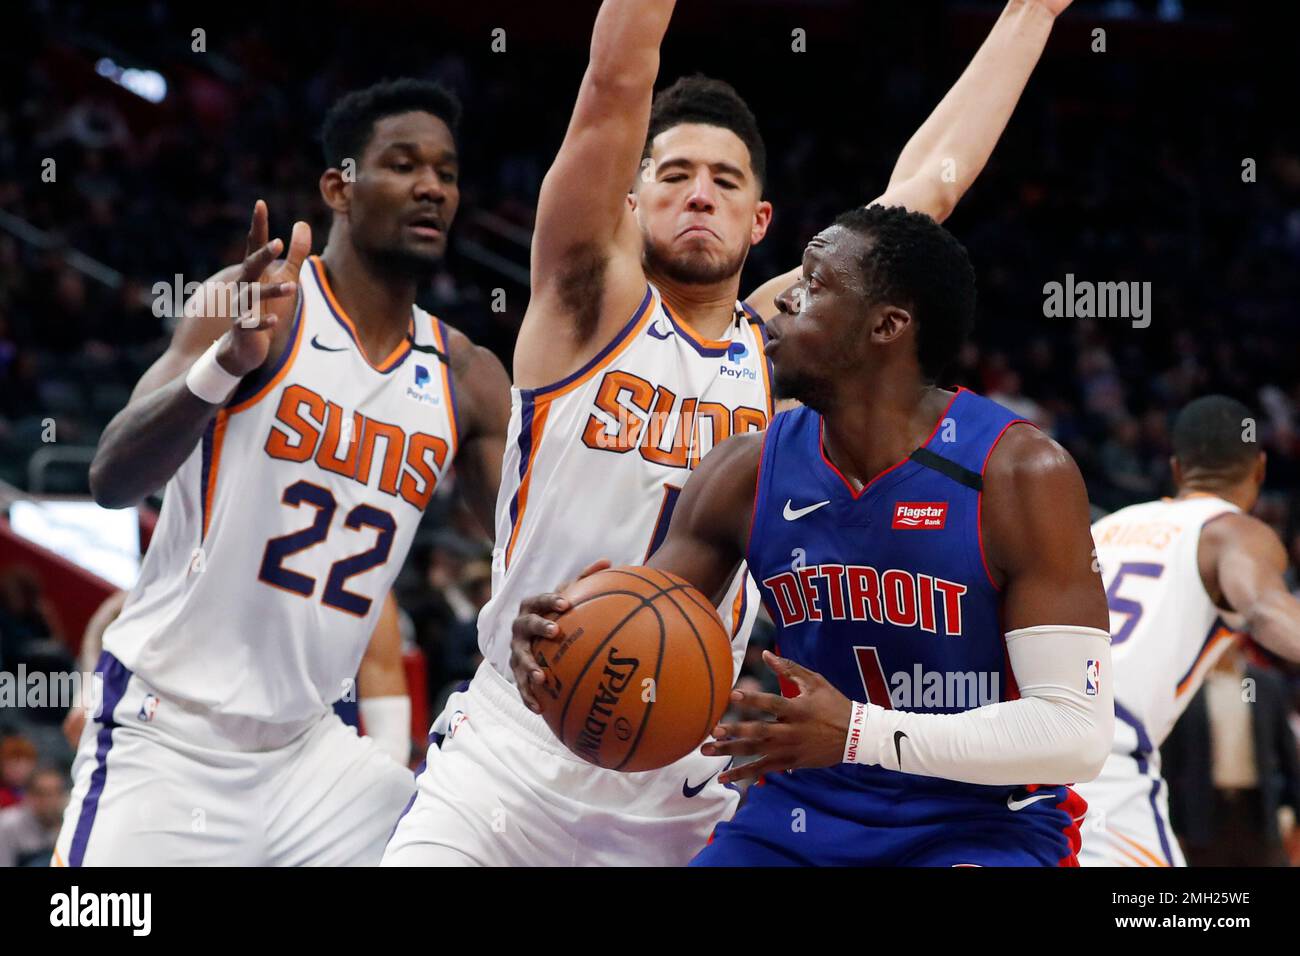 Detroit Pistons guard Reggie Jackson (1) is defended by Phoenix Suns guard Devin Booker (1) and center Deandre Ayton (22) during the second half of an NBA basketball game, Wednesday, Feb. 5, 2020, in Detroit. (AP Photo/Carlos Osorio) Stock Photo